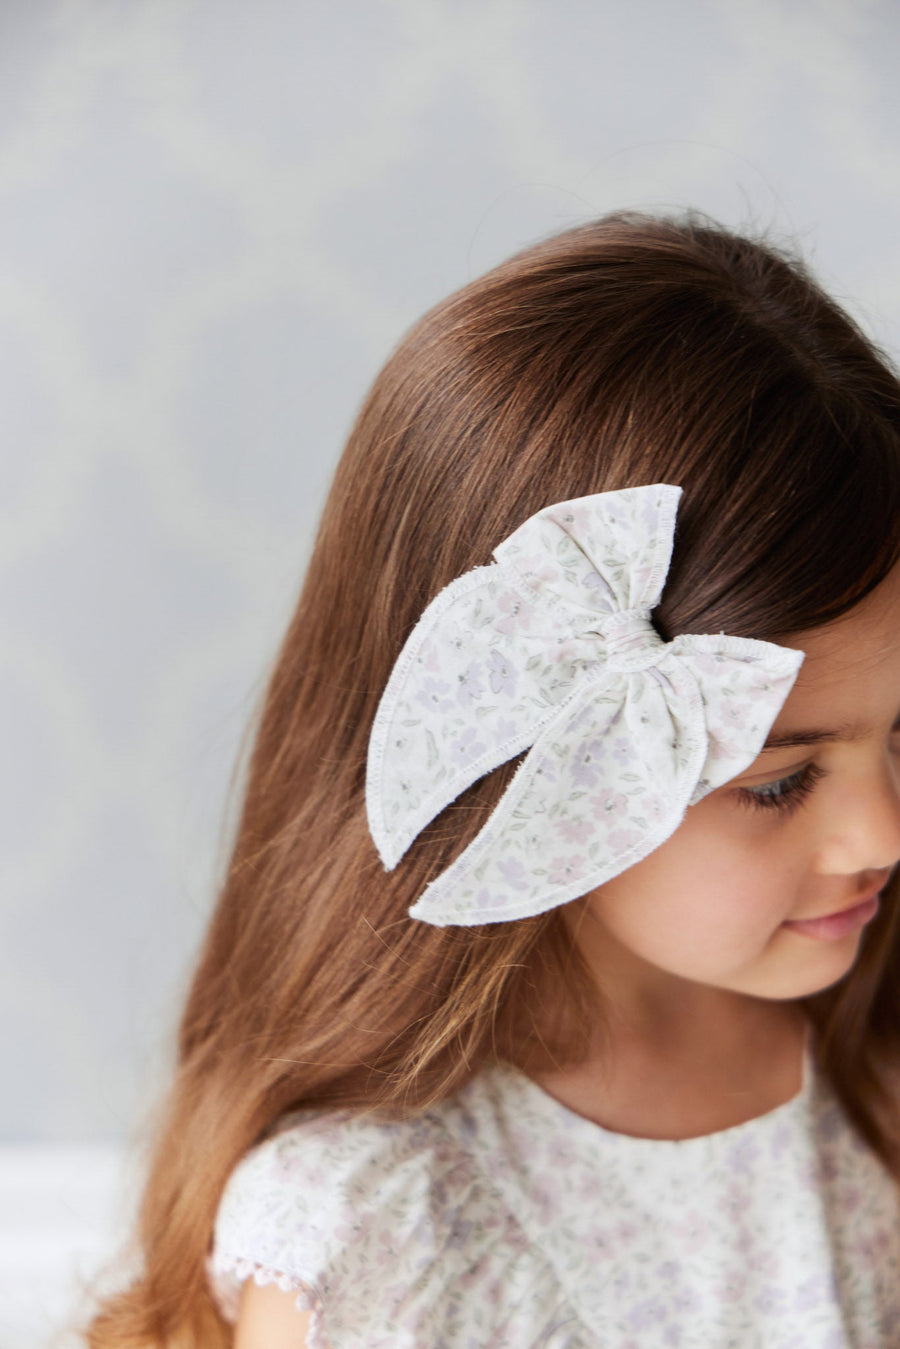 Organic Cotton Noelle Bow - Fifi Lilac Childrens Bow from Jamie Kay USA